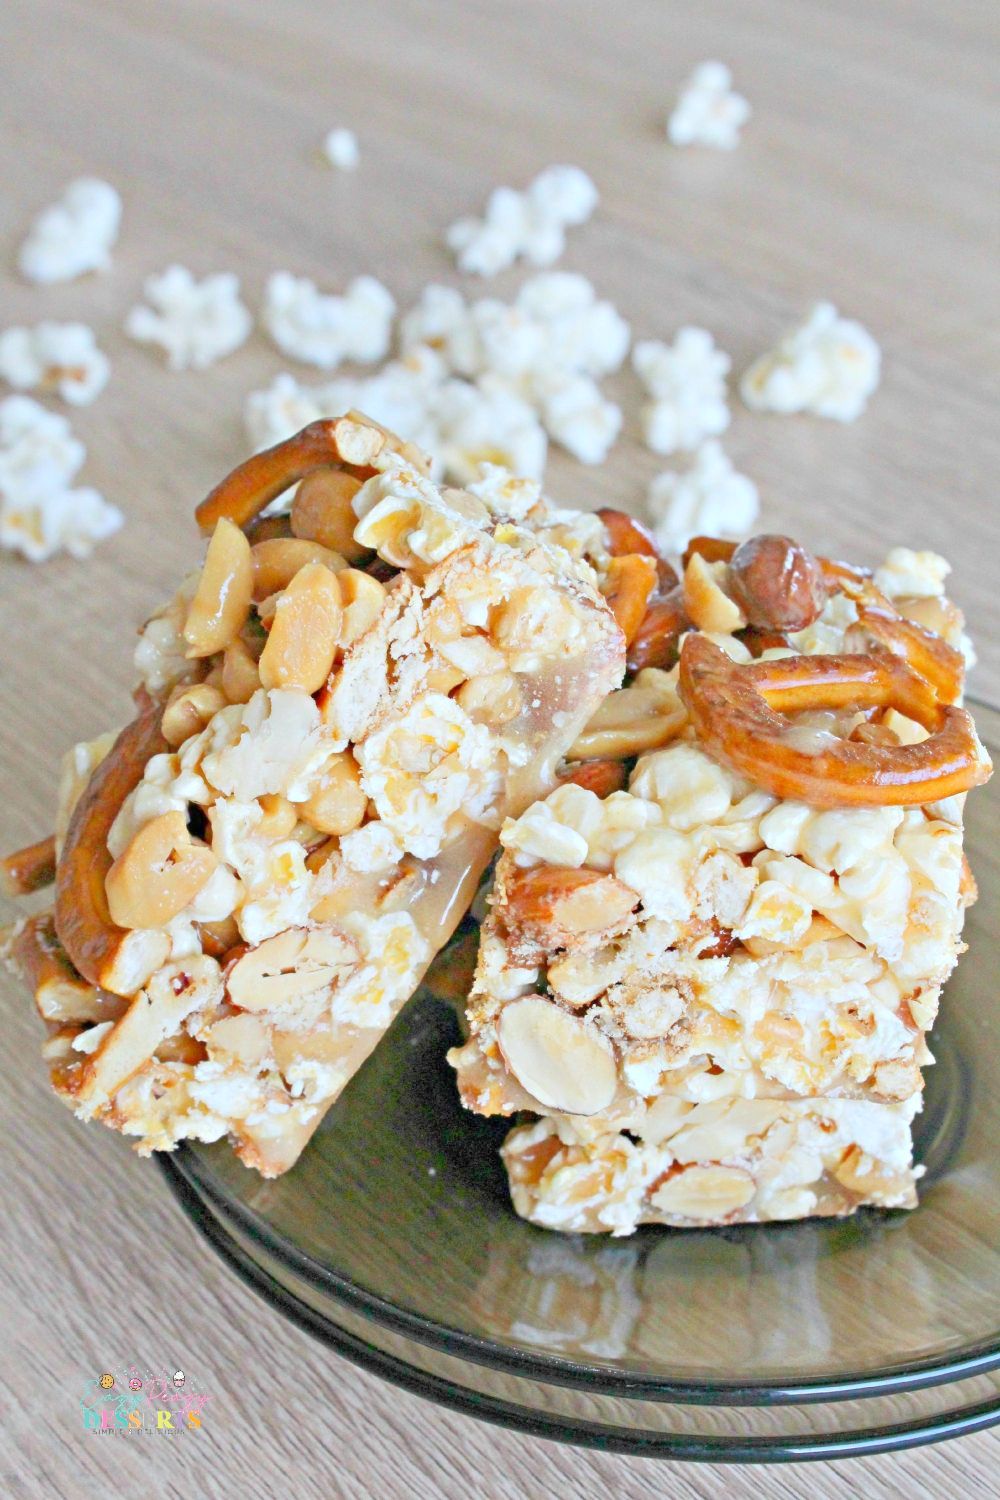 Image of 3 bars of popcorn dessert with caramel, pretzel and mixed nuts